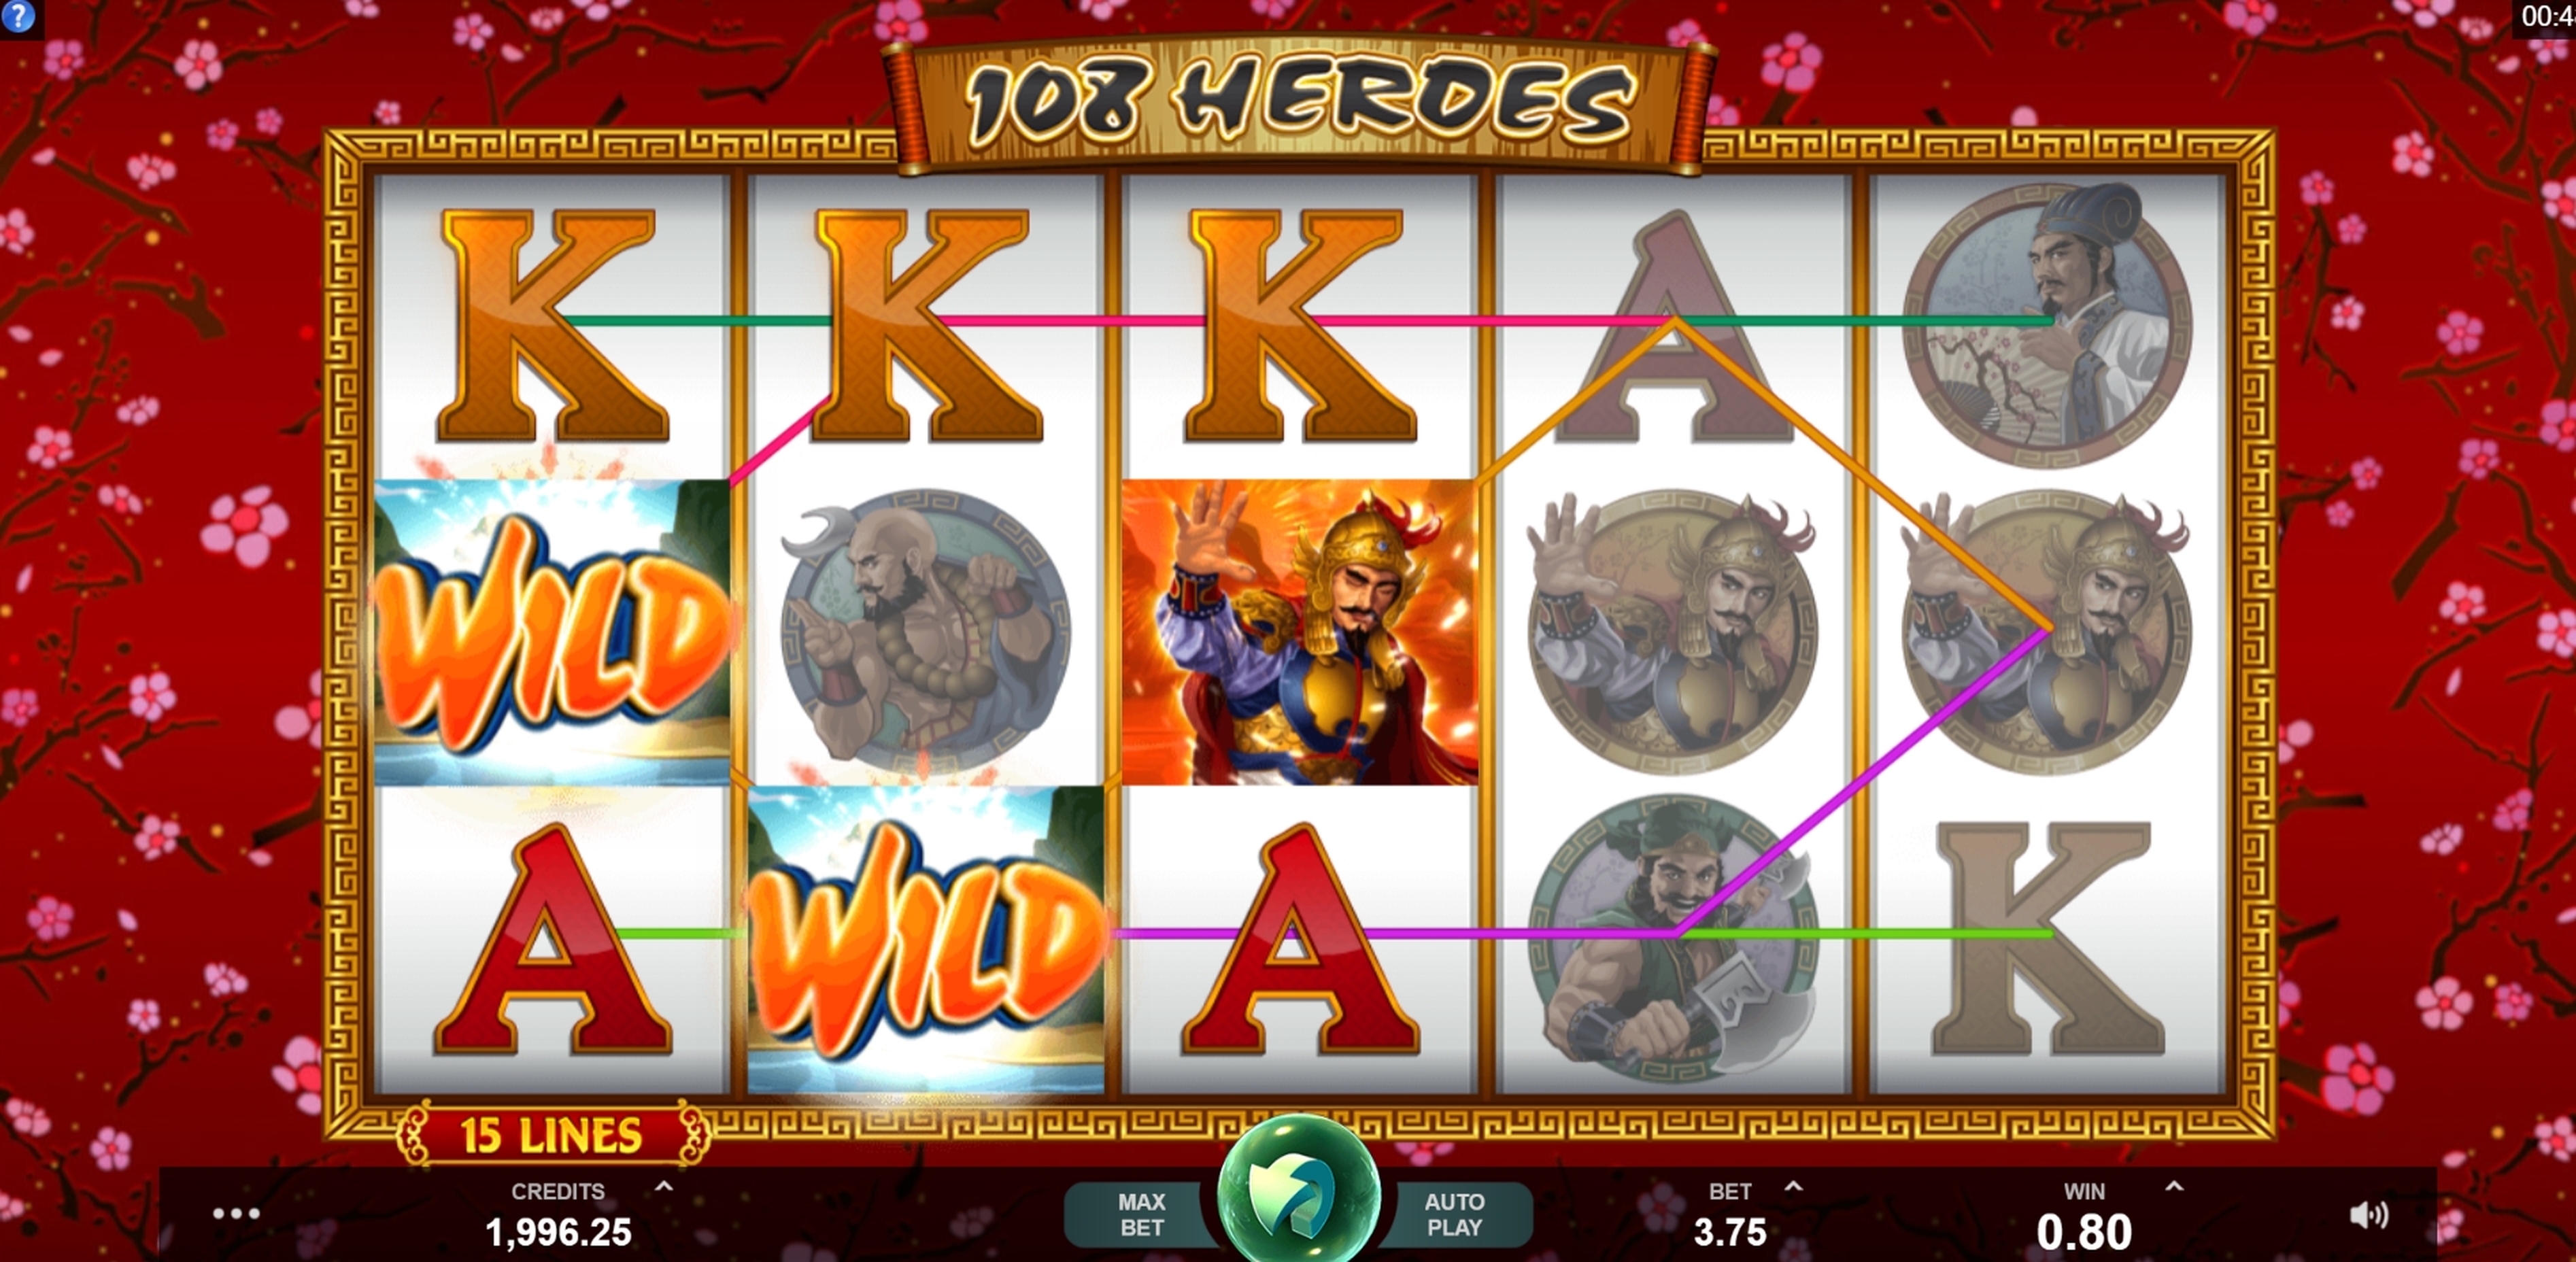 Win Money in 108 Heroes Free Slot Game by MahiGaming